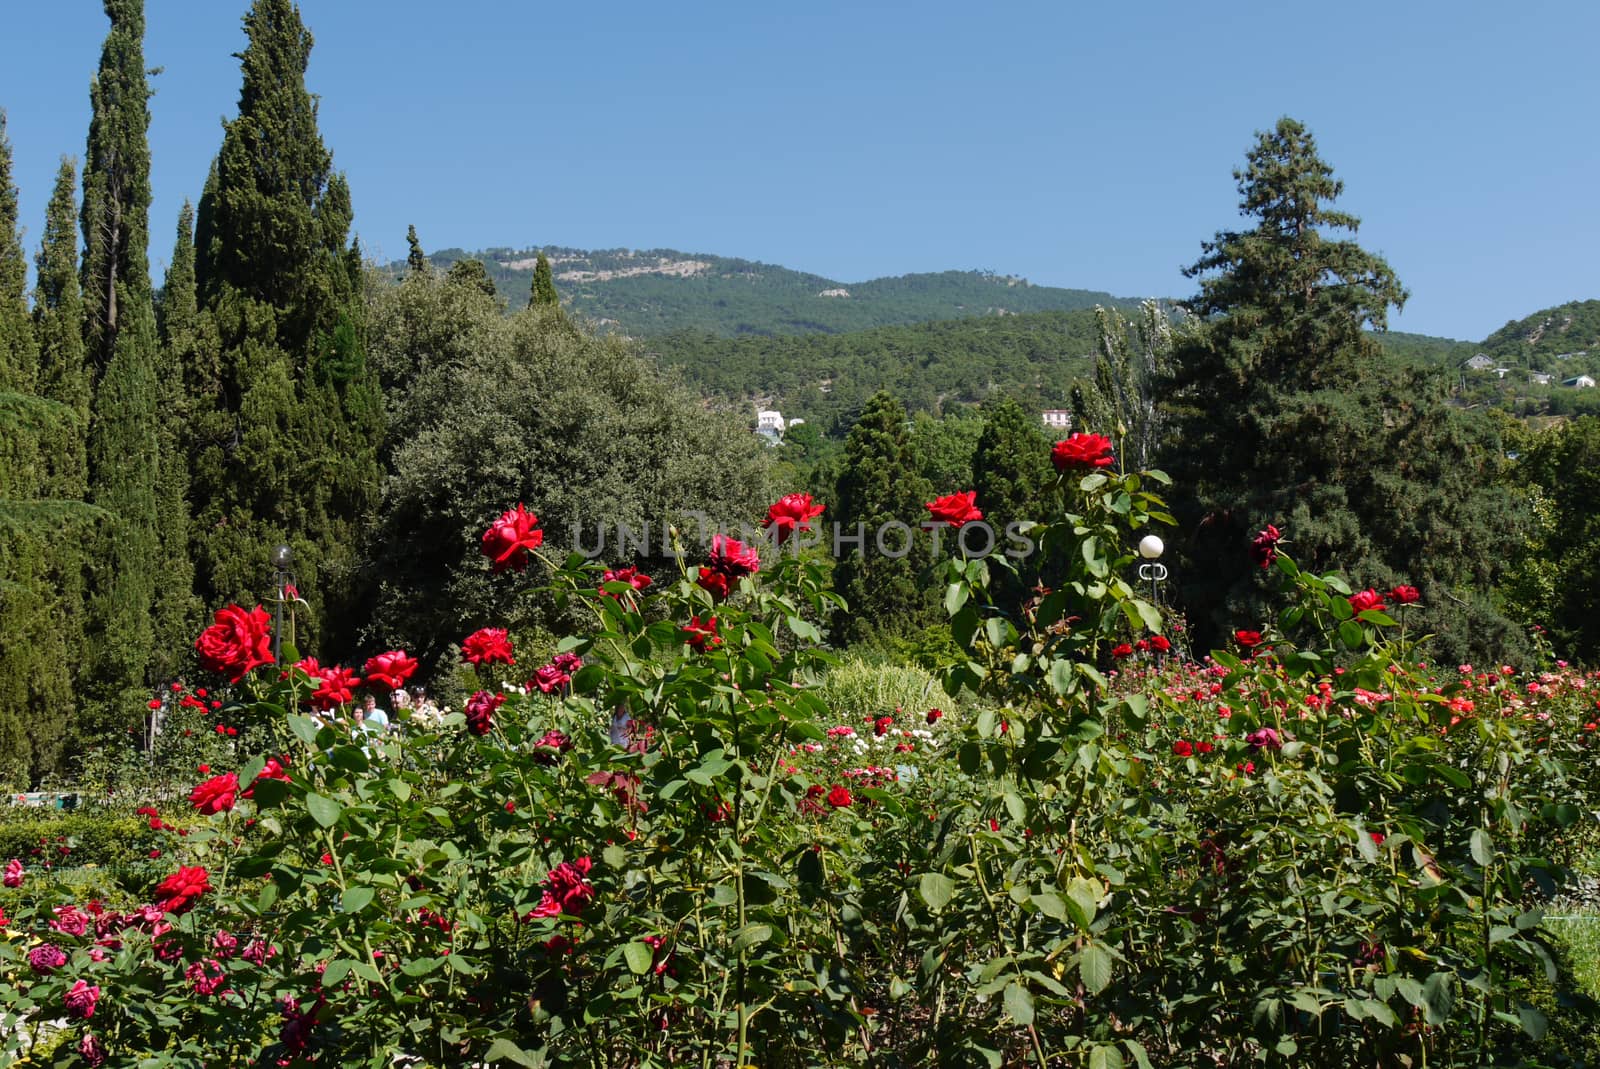 a large flower bed with flowers with a lush bush of red roses in the foreground against the background of mountain peaks visible in the distance